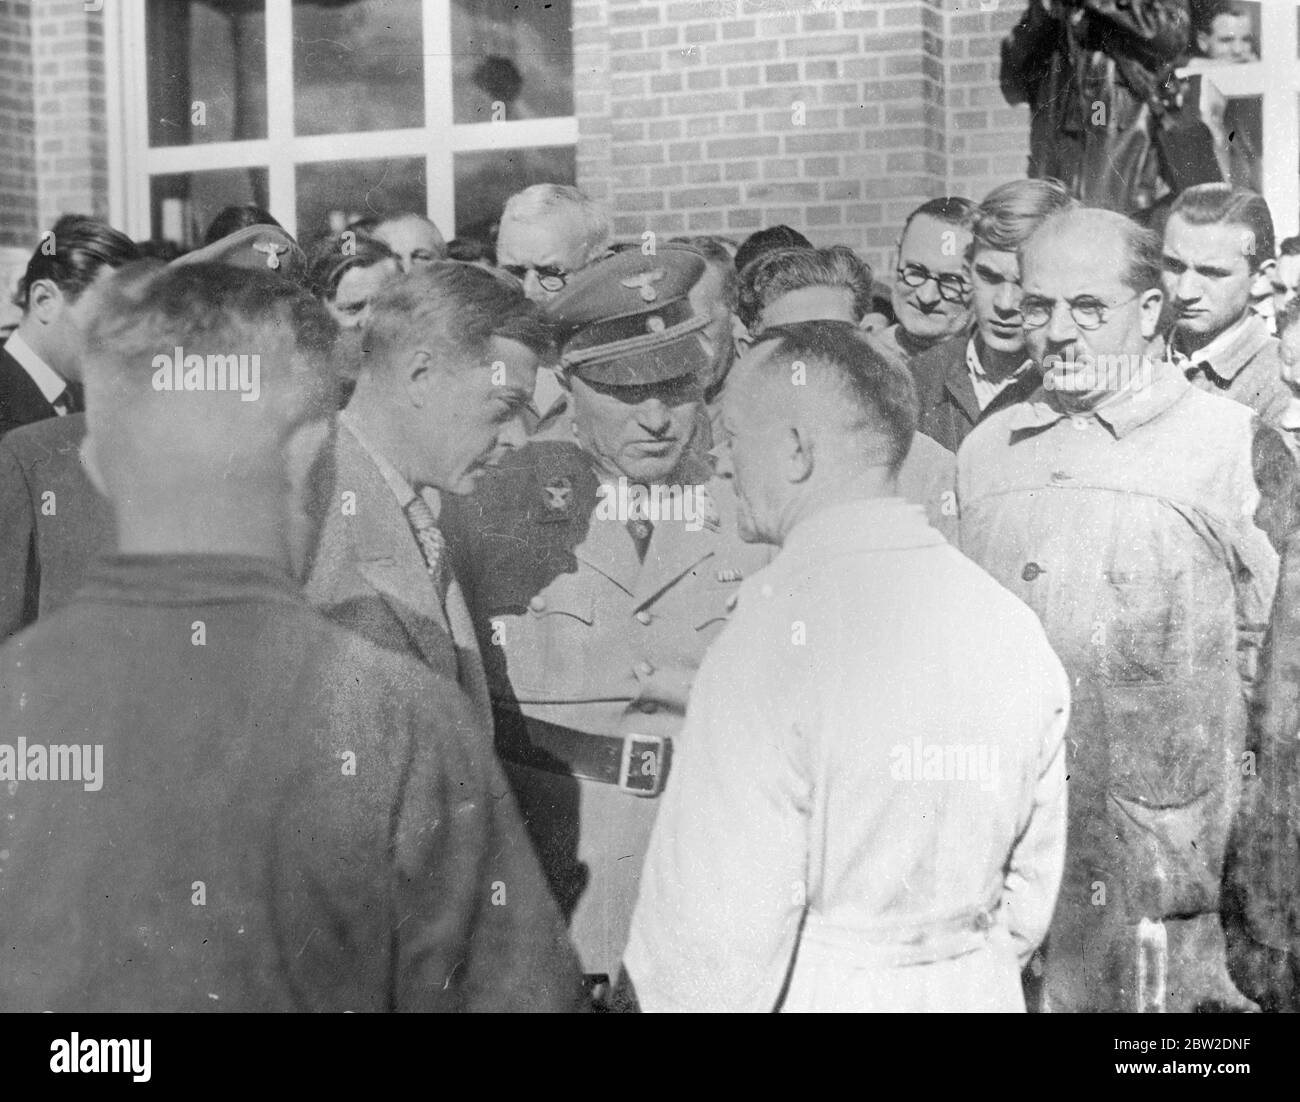 Making his first visit to the city in 13 years the Duke of Windsor was welcomed by the workers when he made his preliminary inspection of factories in by them, as quoted by German officials. The Duchess may man arrested at hotel the Duke of Windsor is to study housing and factory conditions and Germany before going to America on a similar mission. The Duke talking with a factory worker during his tour. 11 October 1937. Stock Photo